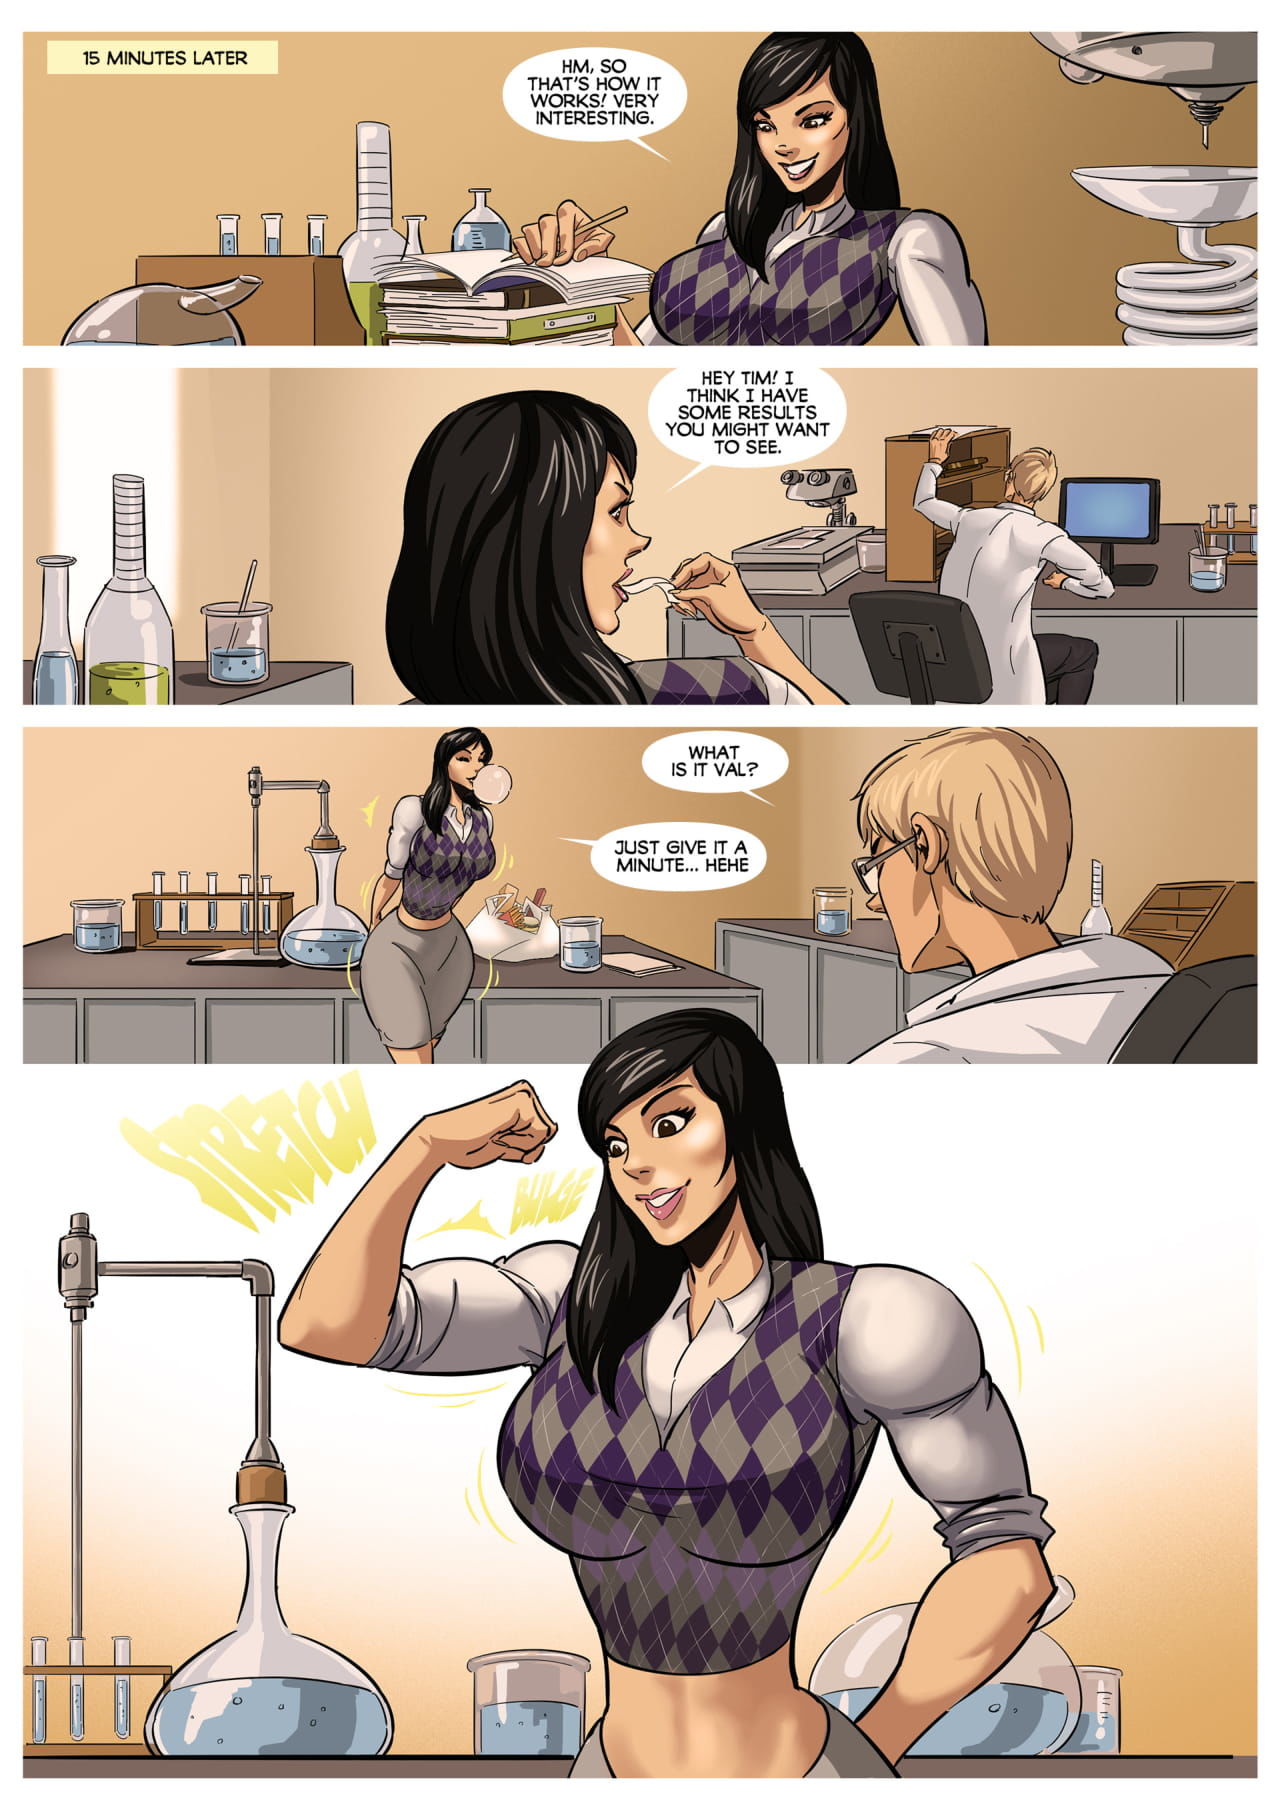 Strong Flavor 2 MuscleFan & LY page 7